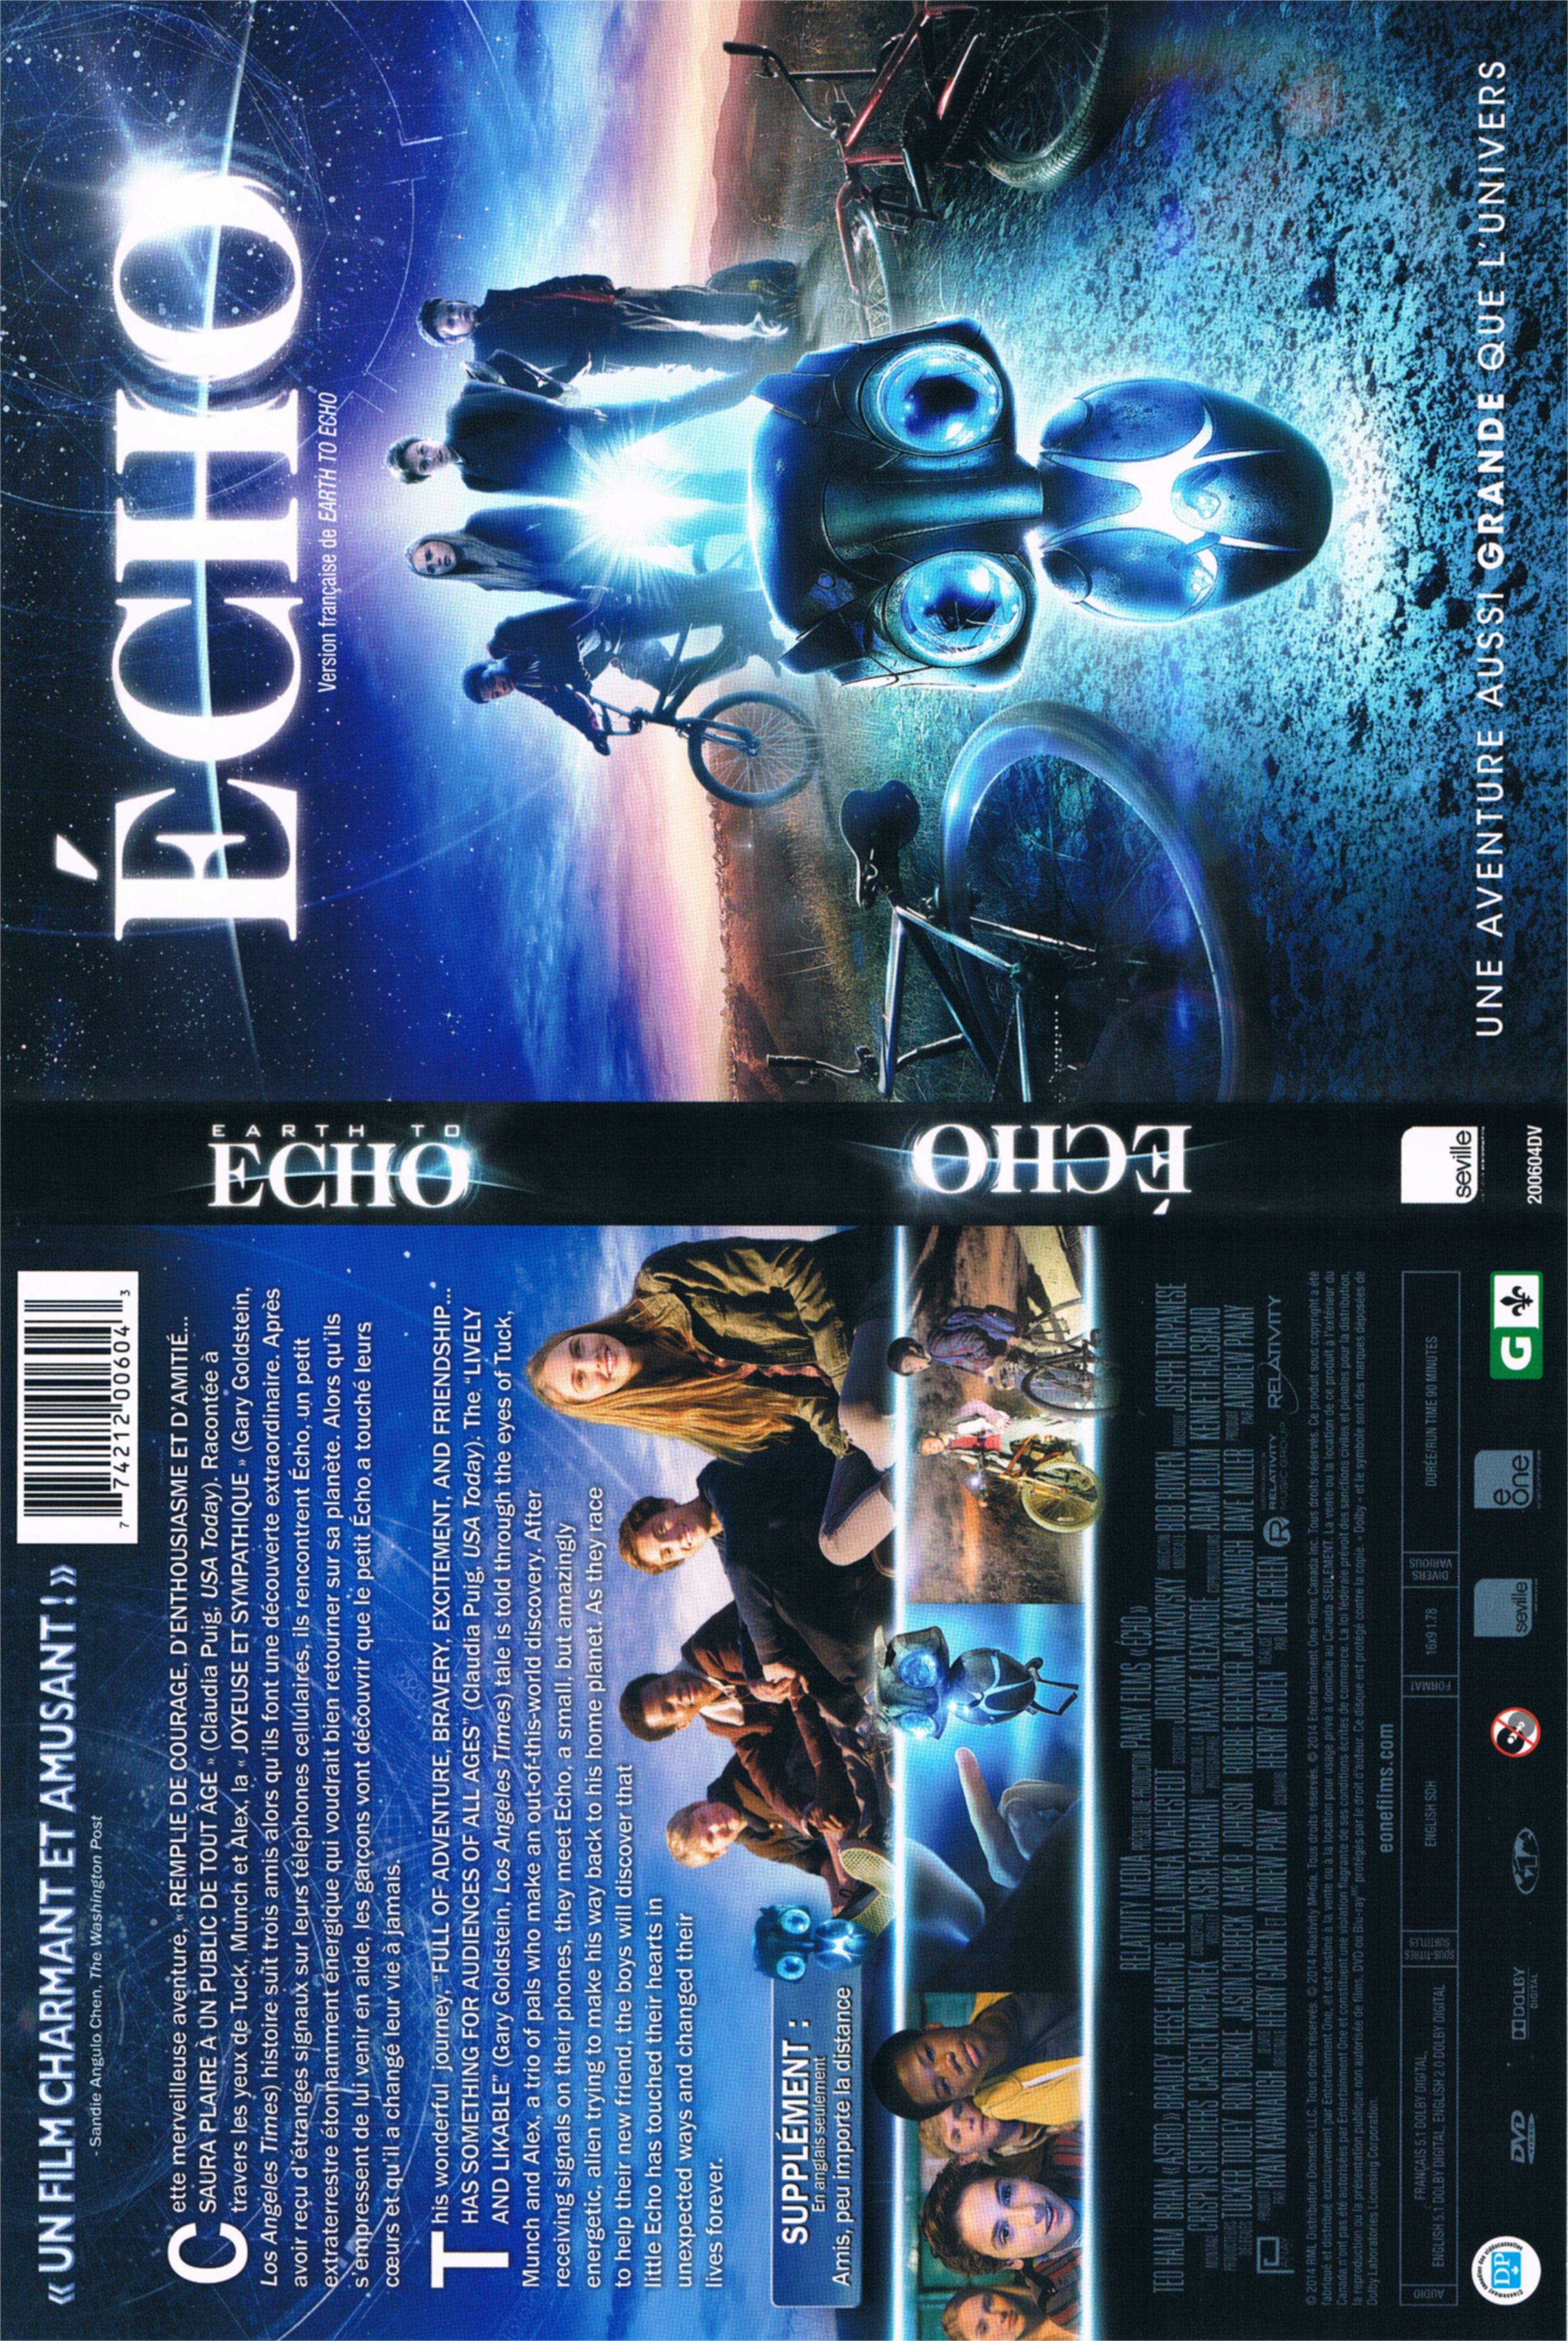 Earth To Echo (2014)